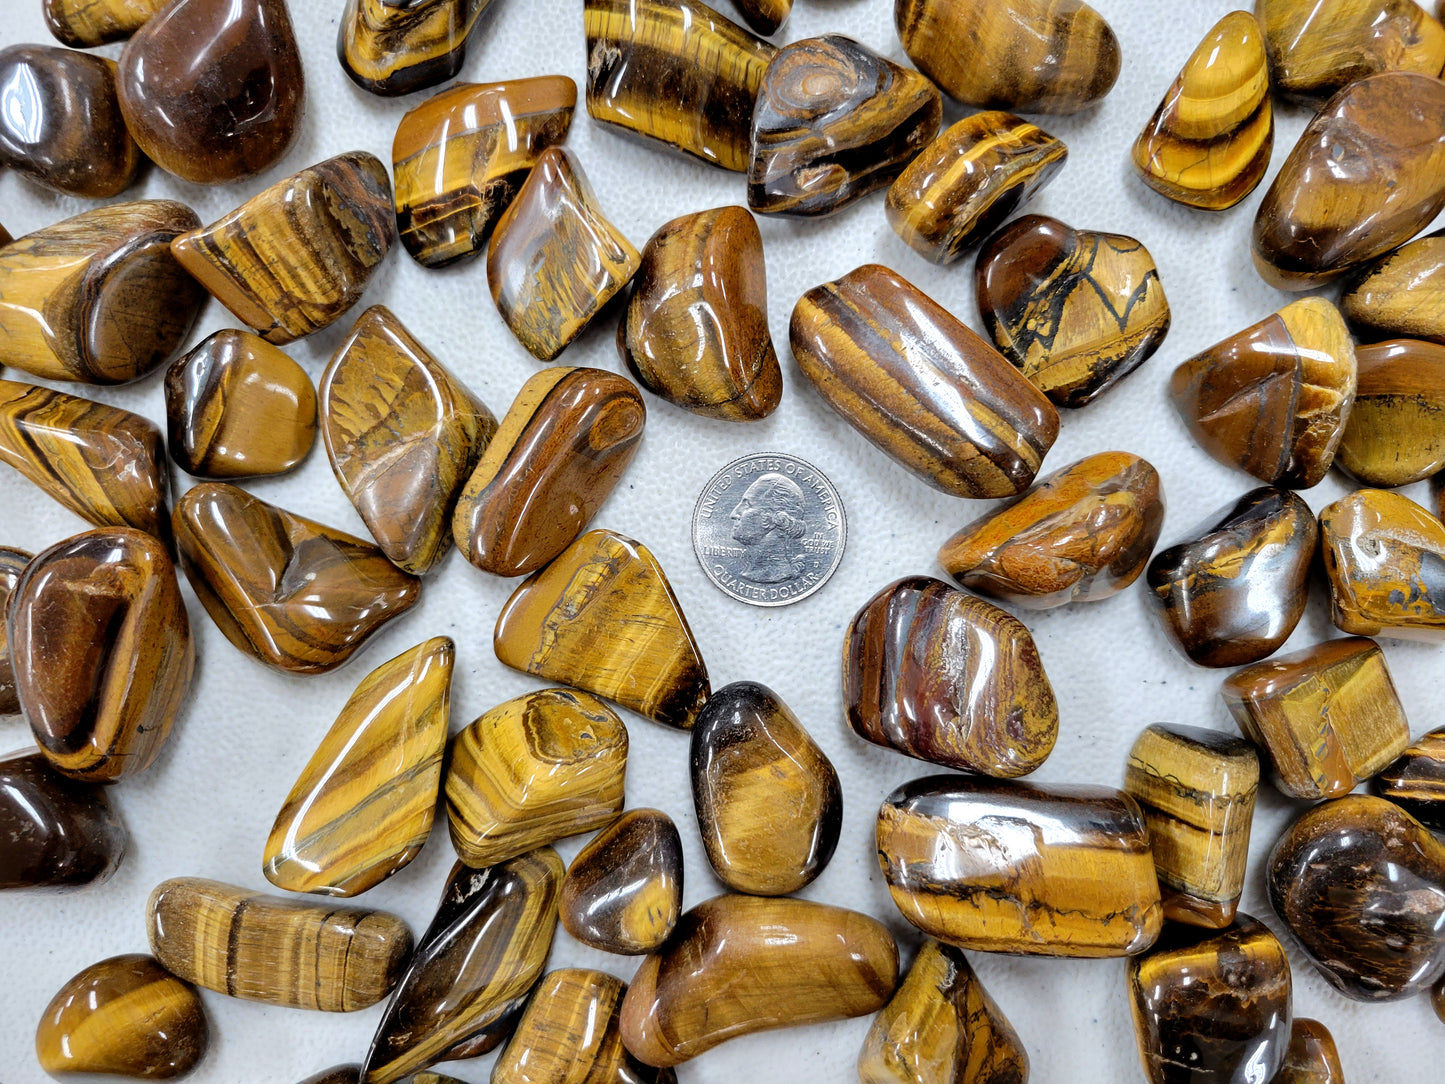 Bulk Tumbled Golden Tiger's Eye Crystal Stones - Size Medium - 1 inch to 2 inches